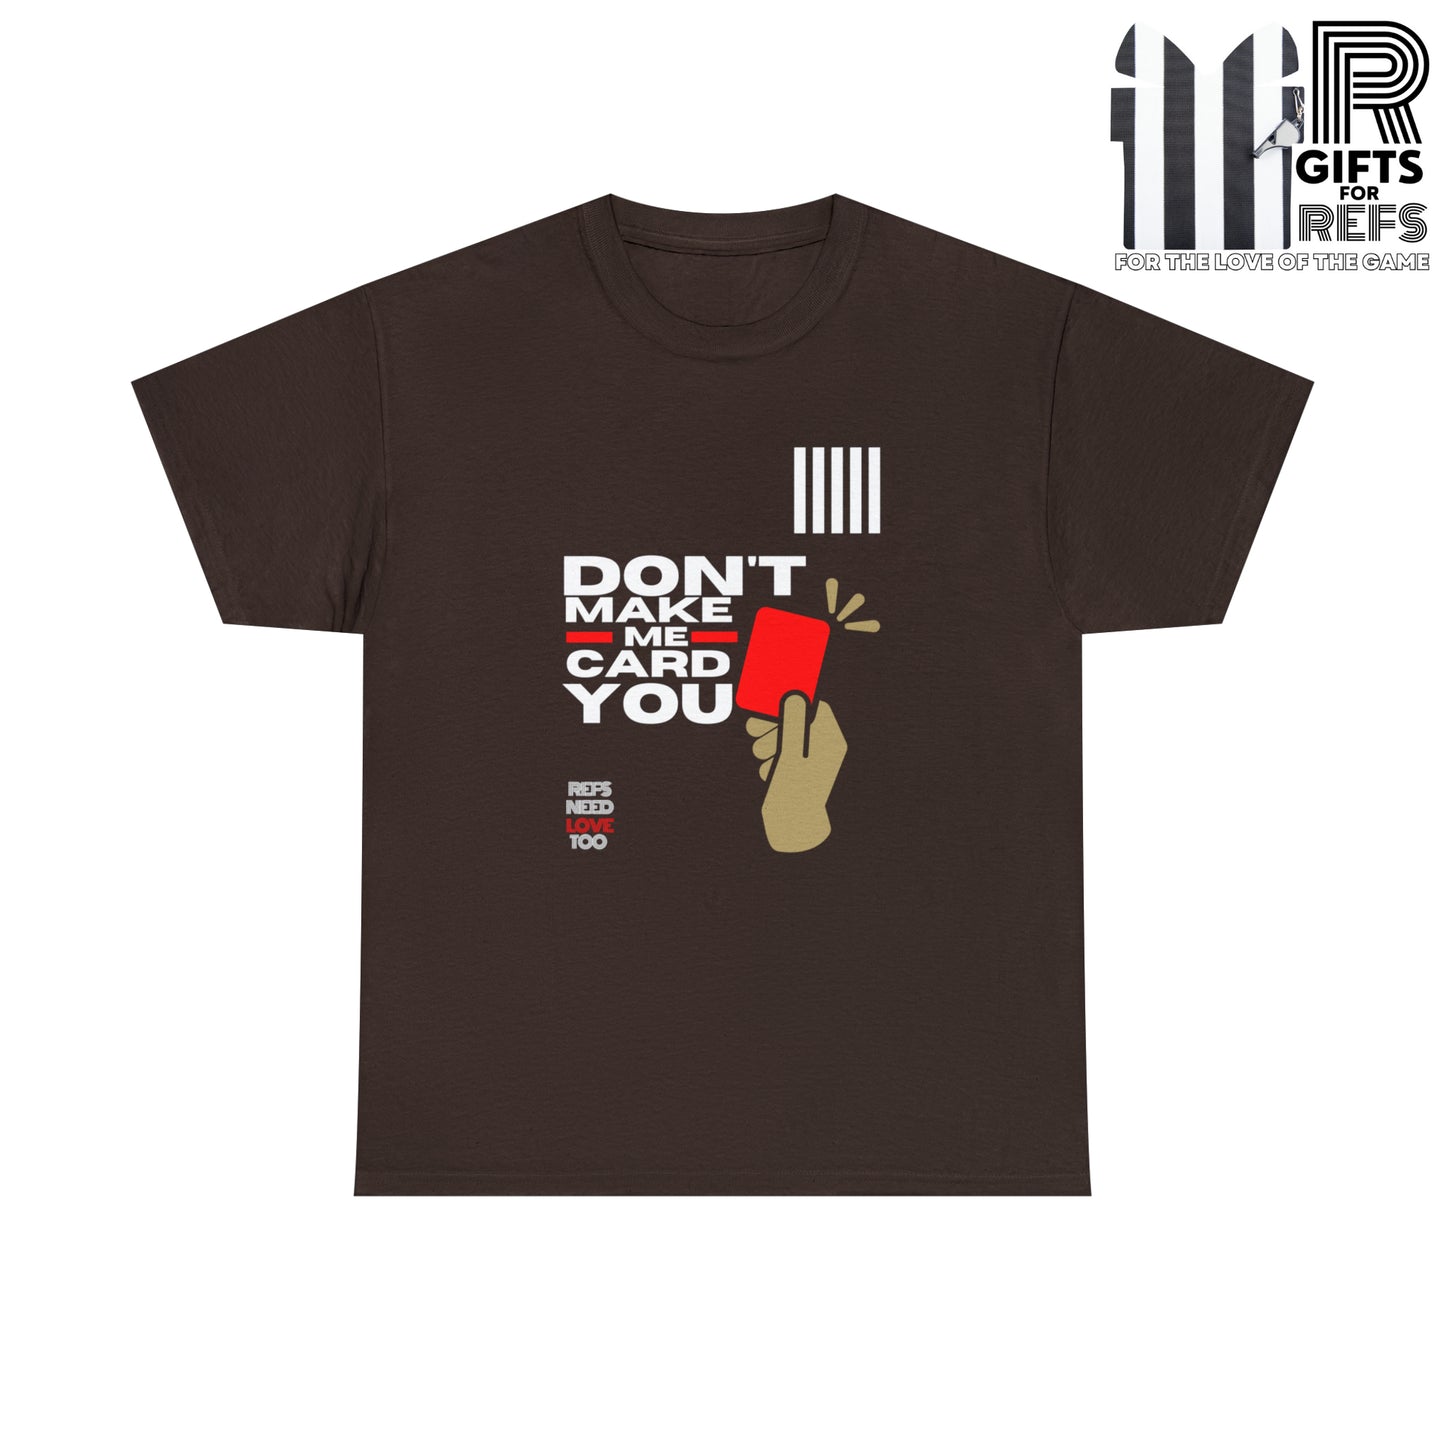 Don't Make Me Card You Cotton Tee | Gift For Soccer Refs | Screen printed t shirt| Funny Red card shirt | Referee gifts | Refs Need Love Too